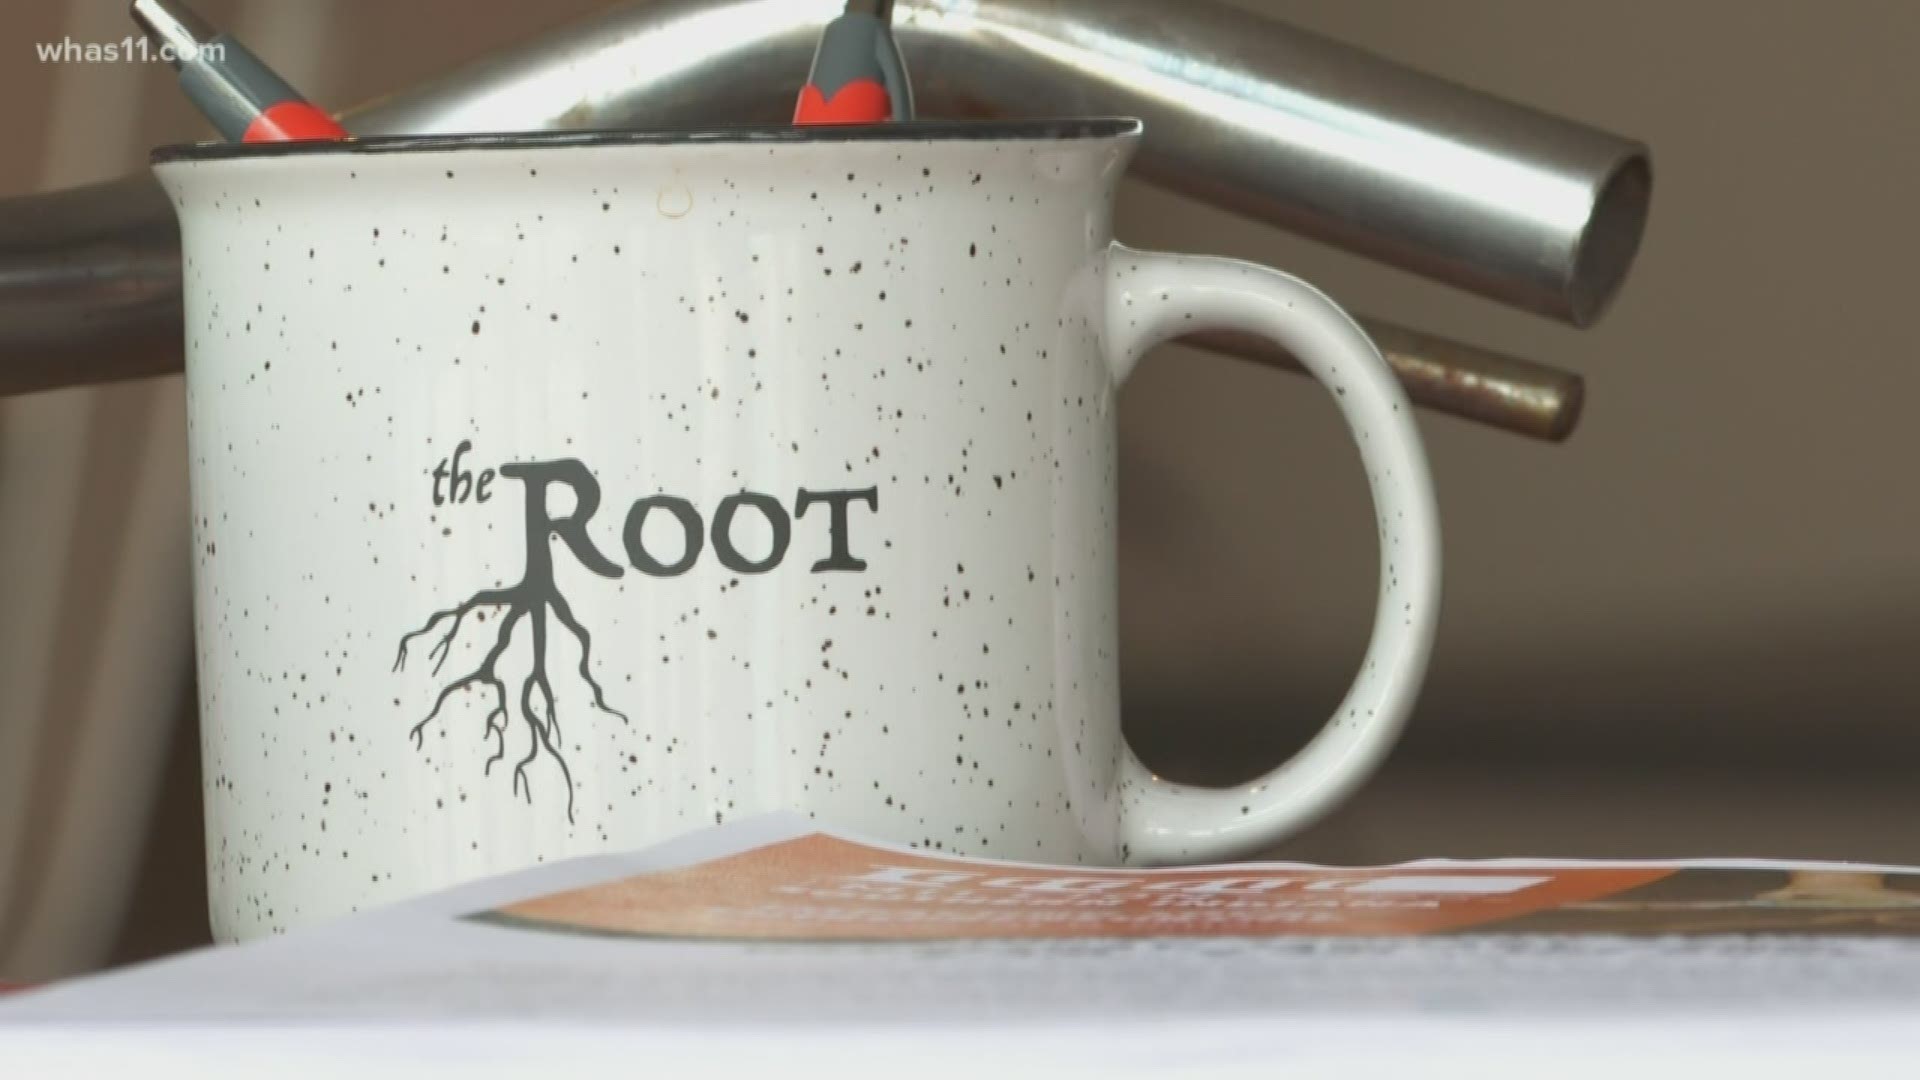 The Root is looking to extend its reach in So. Indiana.